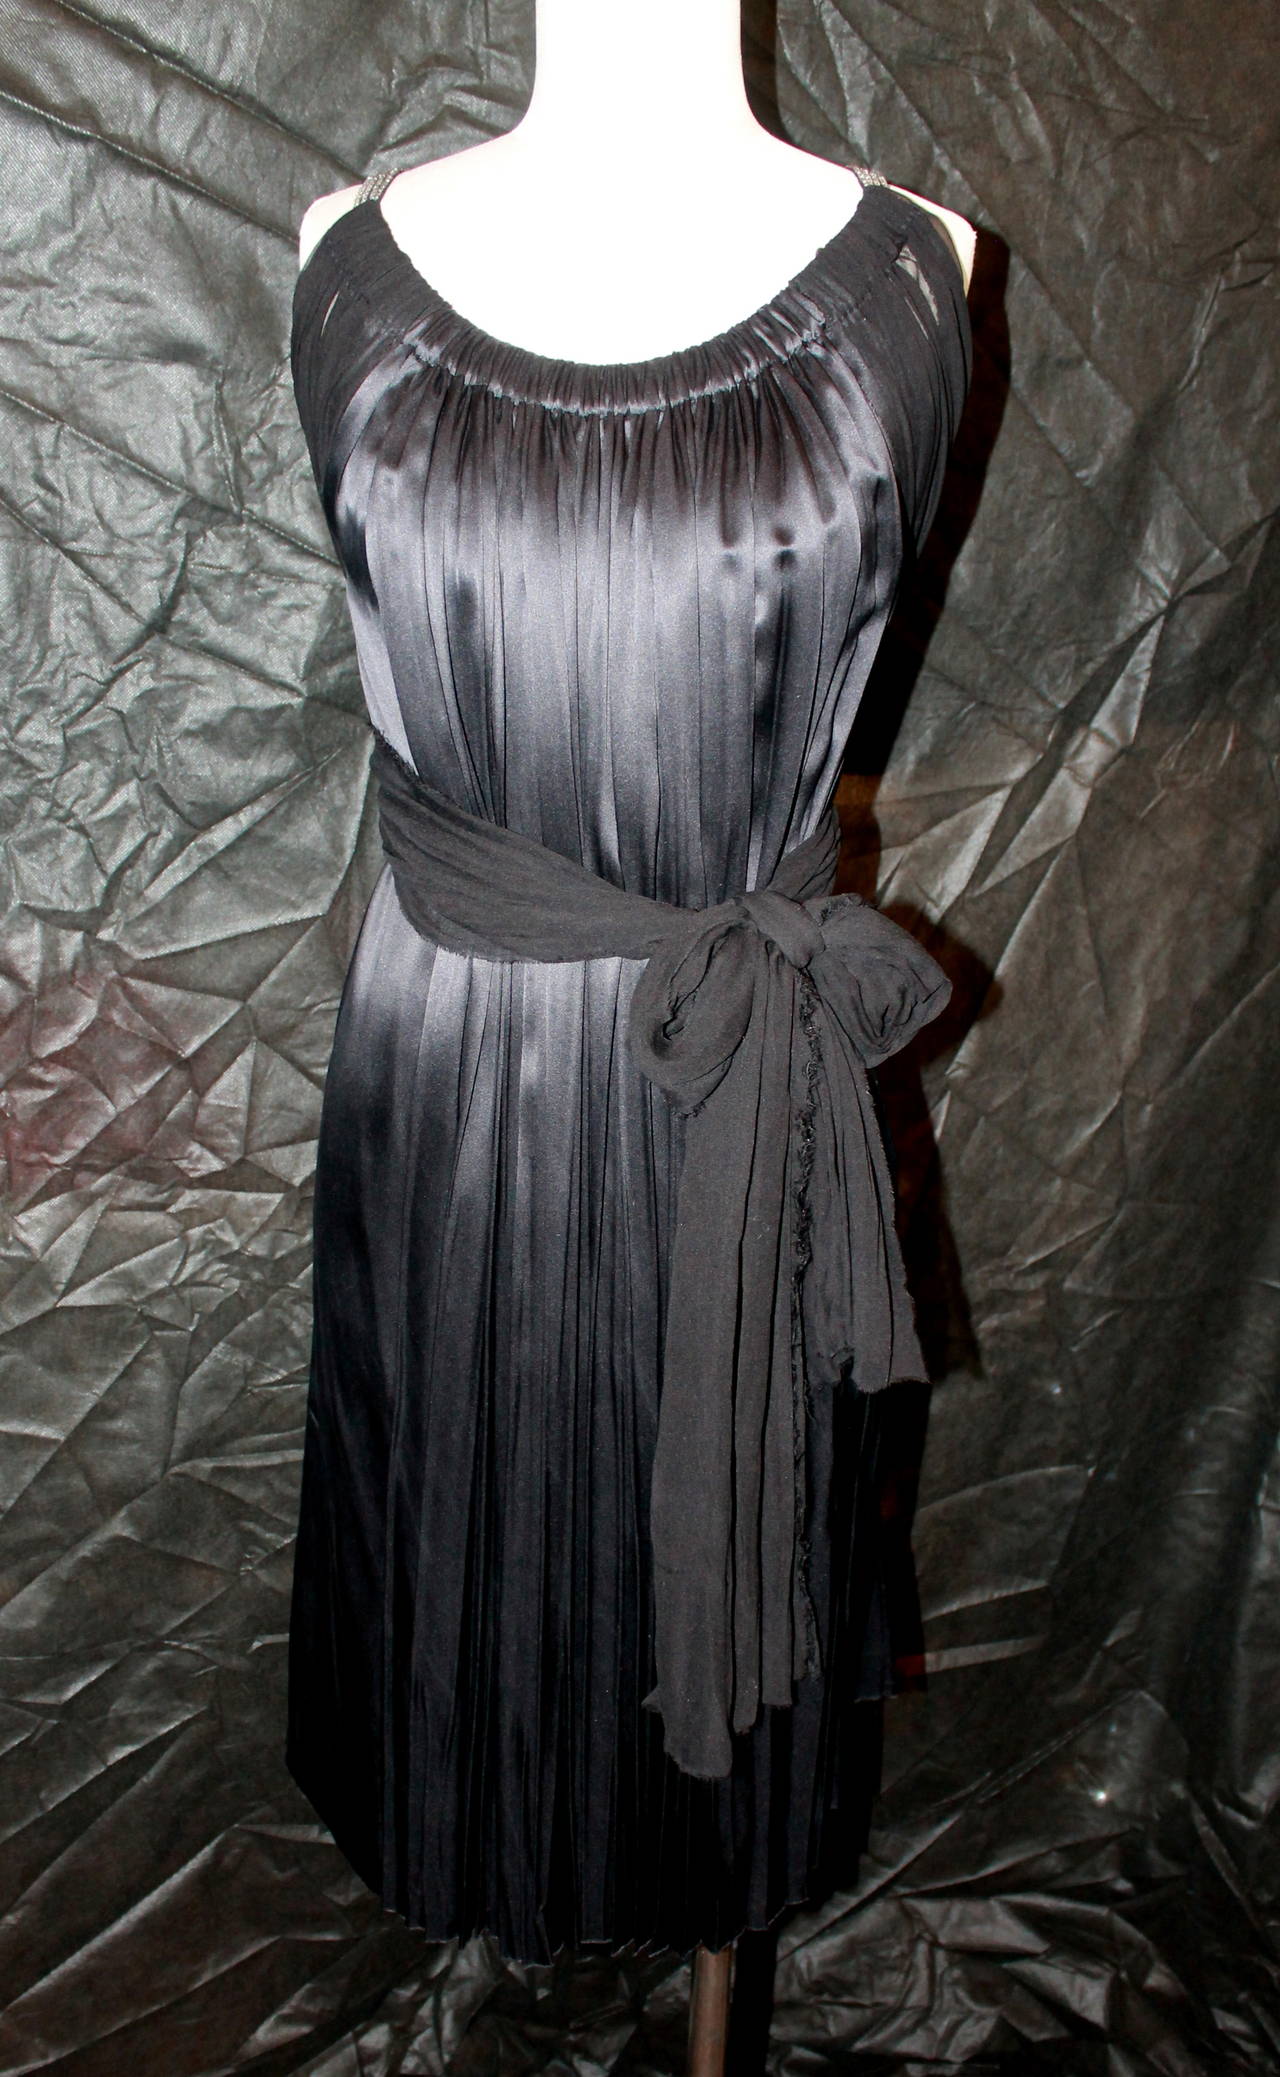 Lanvin Black Silk Chiffon Dress with Rhinestone Straps & Long Sashes. This dress is in very good condition. The sizing on this dress is flexible fitting between a small and large because of its style. 

Measurements:
Sash Length- 57